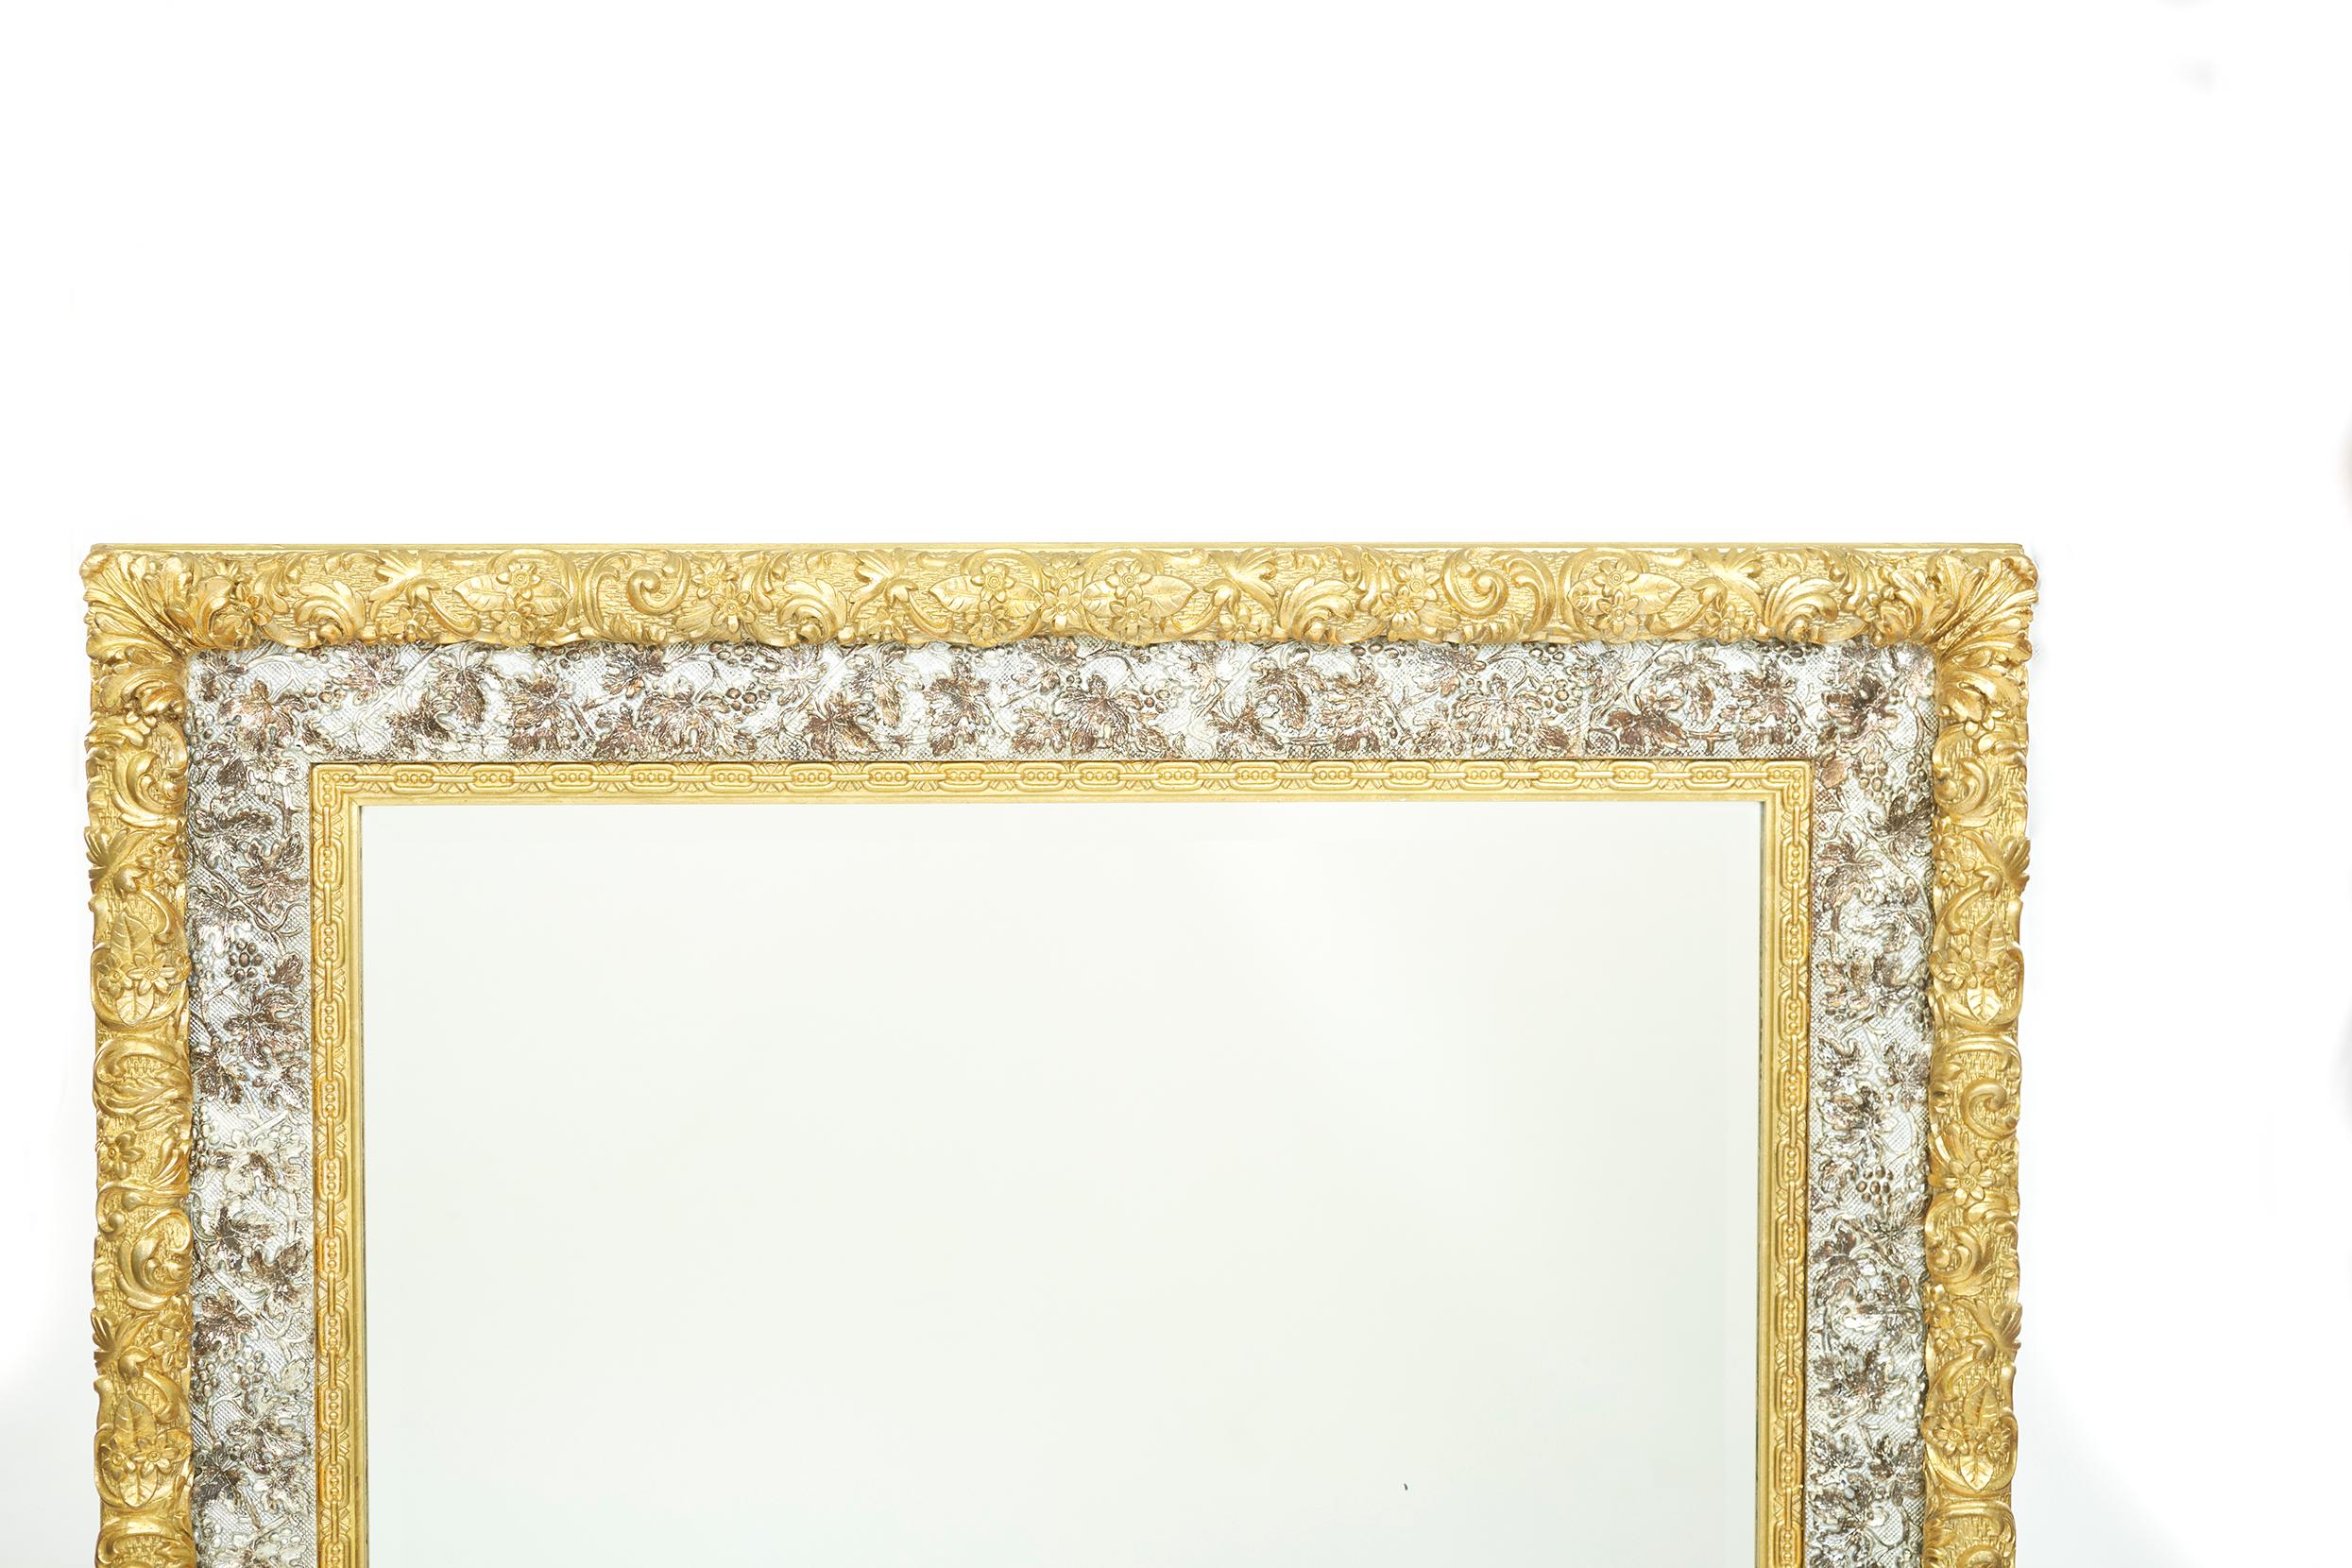 19th century neoclassical style gilt wood framed hanging wall mirror with low relief acanthus carve rectangular Shape with two tone gilt framed. The wall mirror is in great condition. Minor wear consistent with age / use. The dimensions are 50